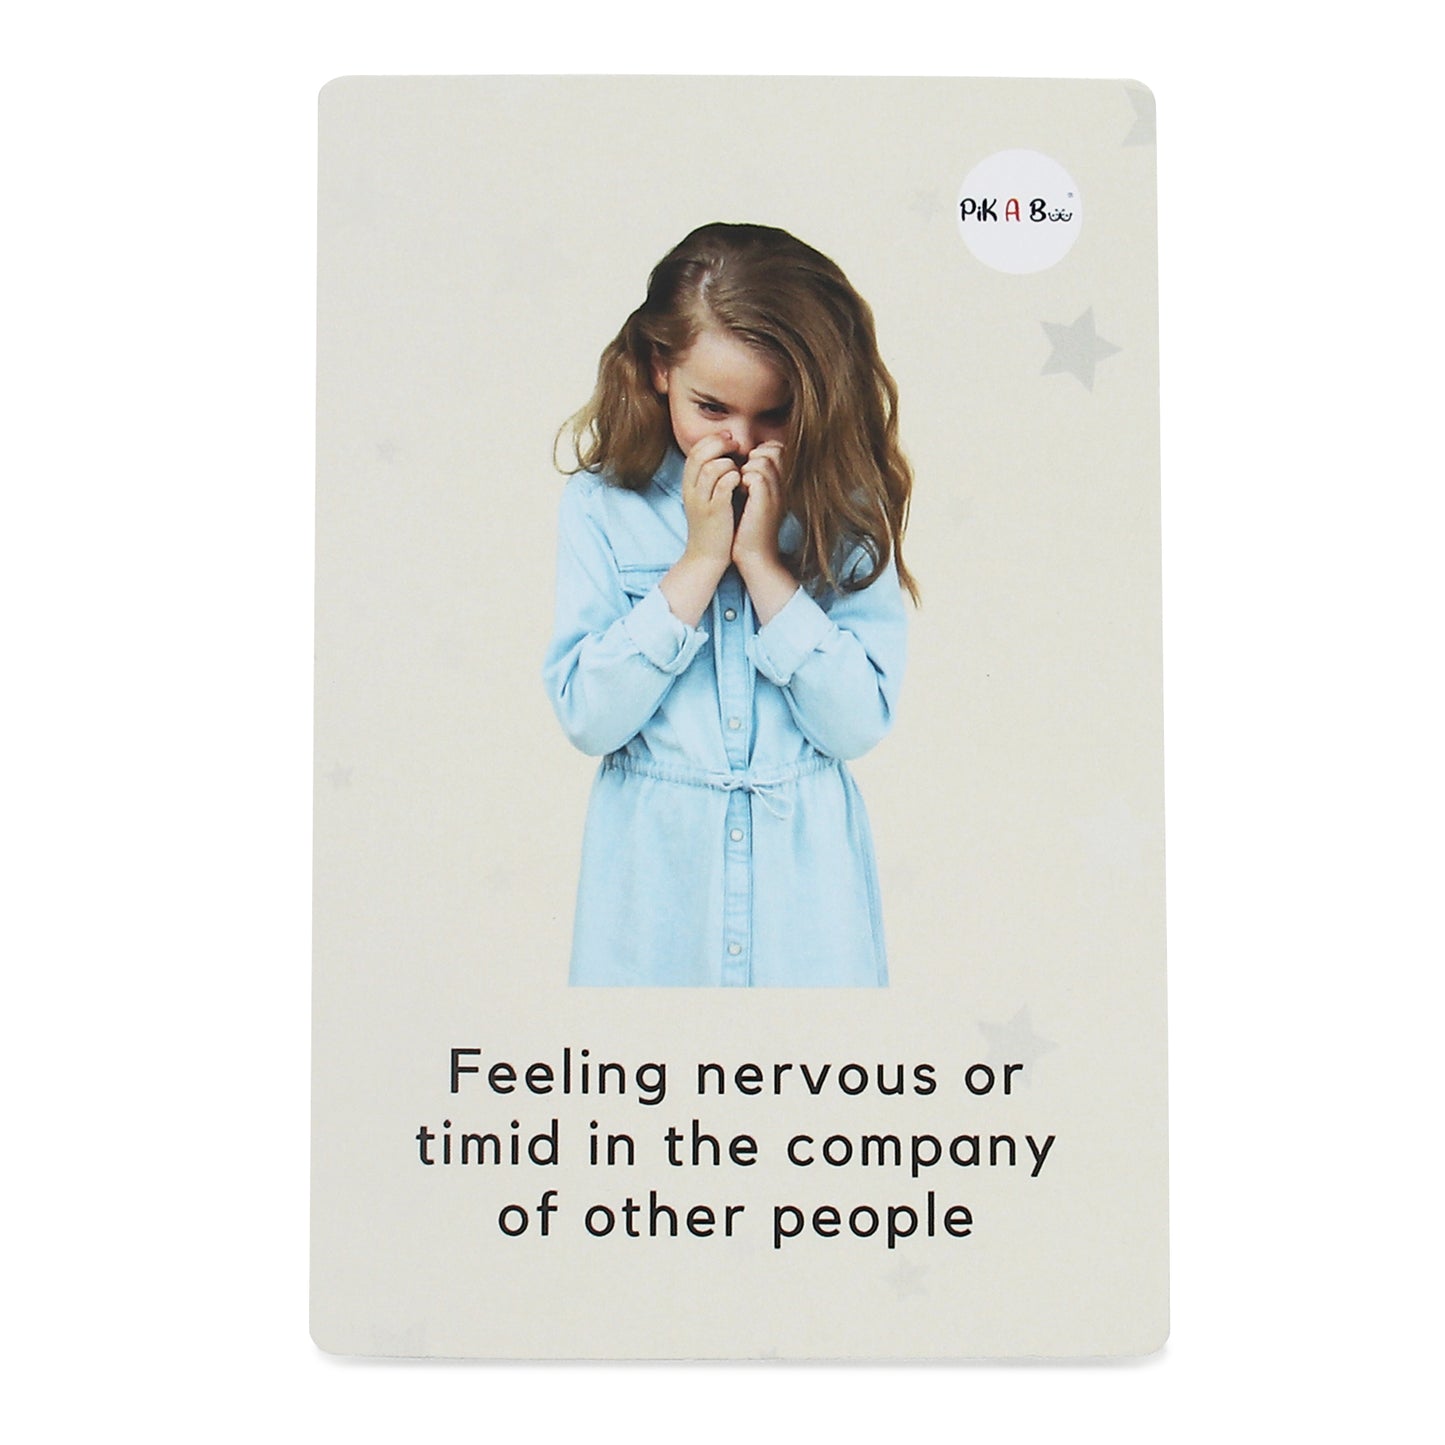 PiK A BOO Emotions and Feelings Flashcard For Kids, Toddlers, Babies | Early Learning Picture Flashcard | Preschool Educational Study Material